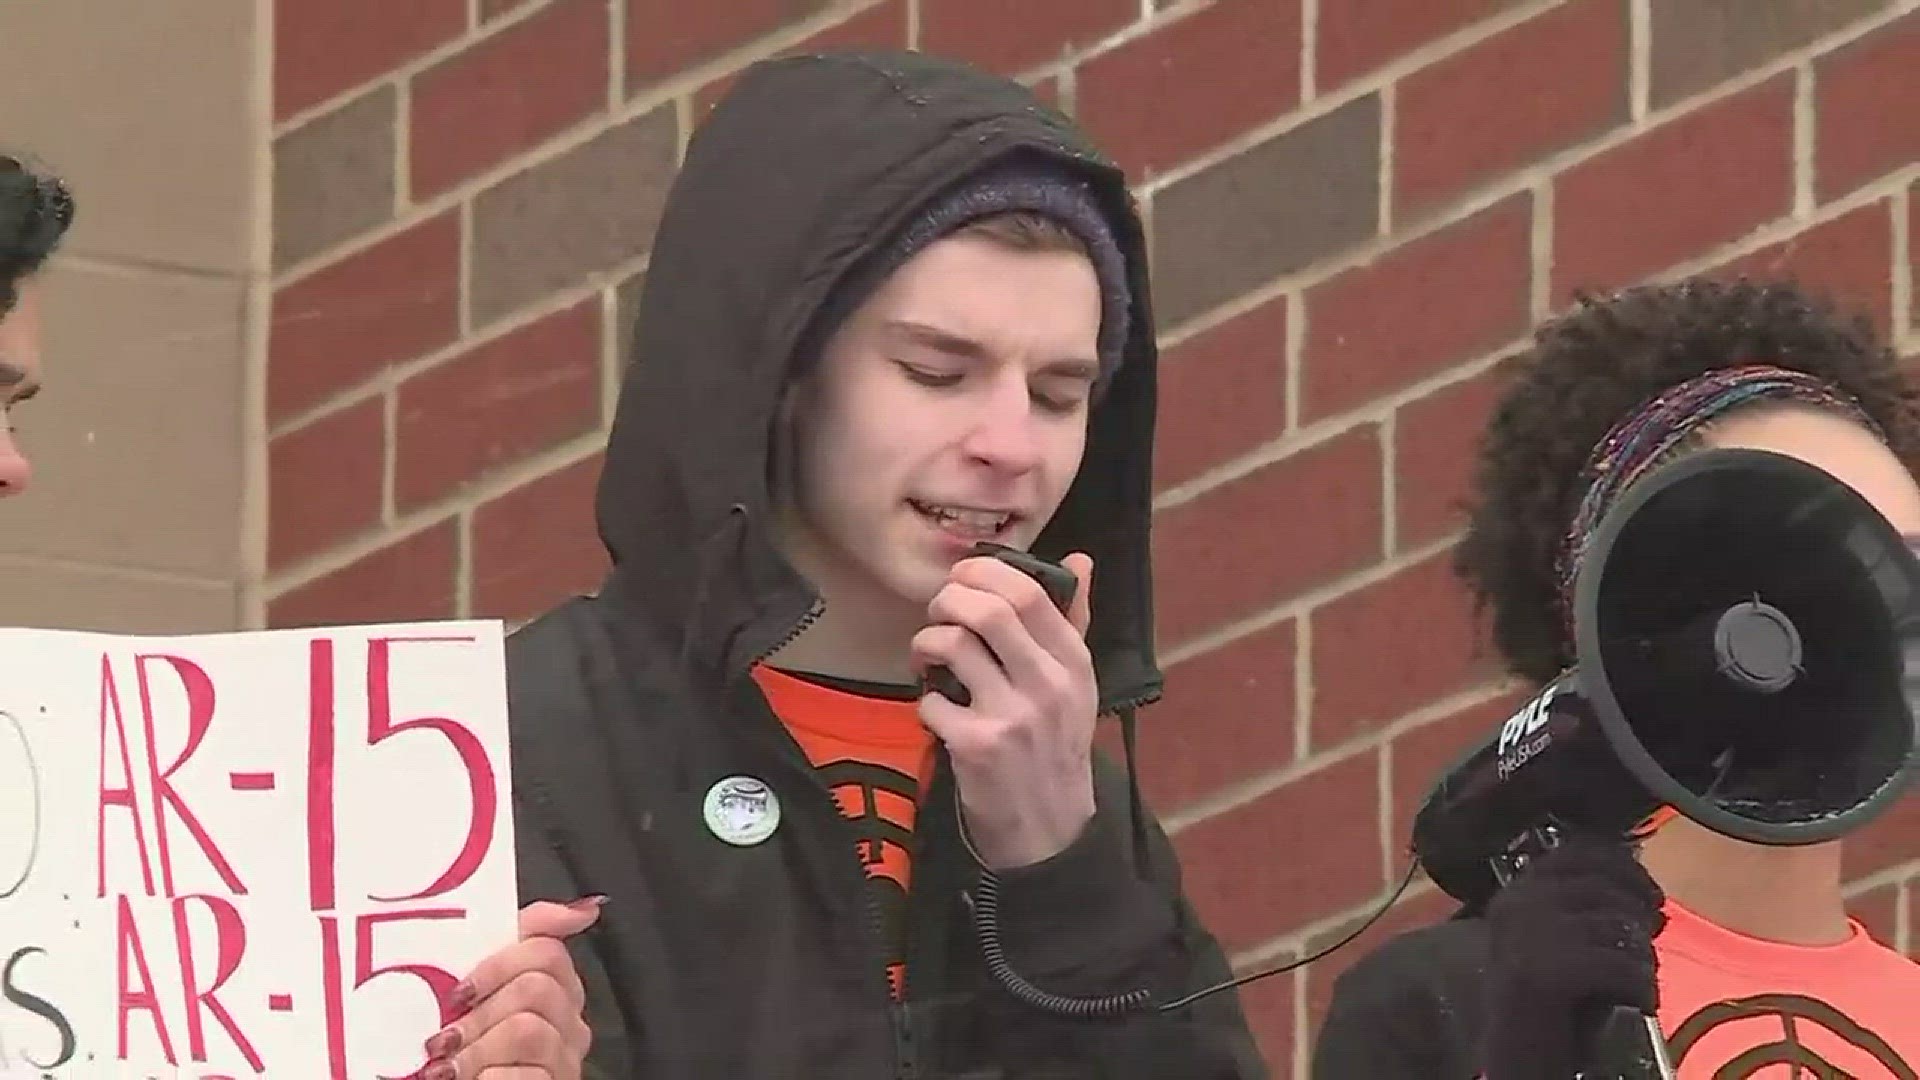 March 14, 2018: This student brought cheers from his peers as classes walked out at Firestone High School in Akron to protest gun violence.